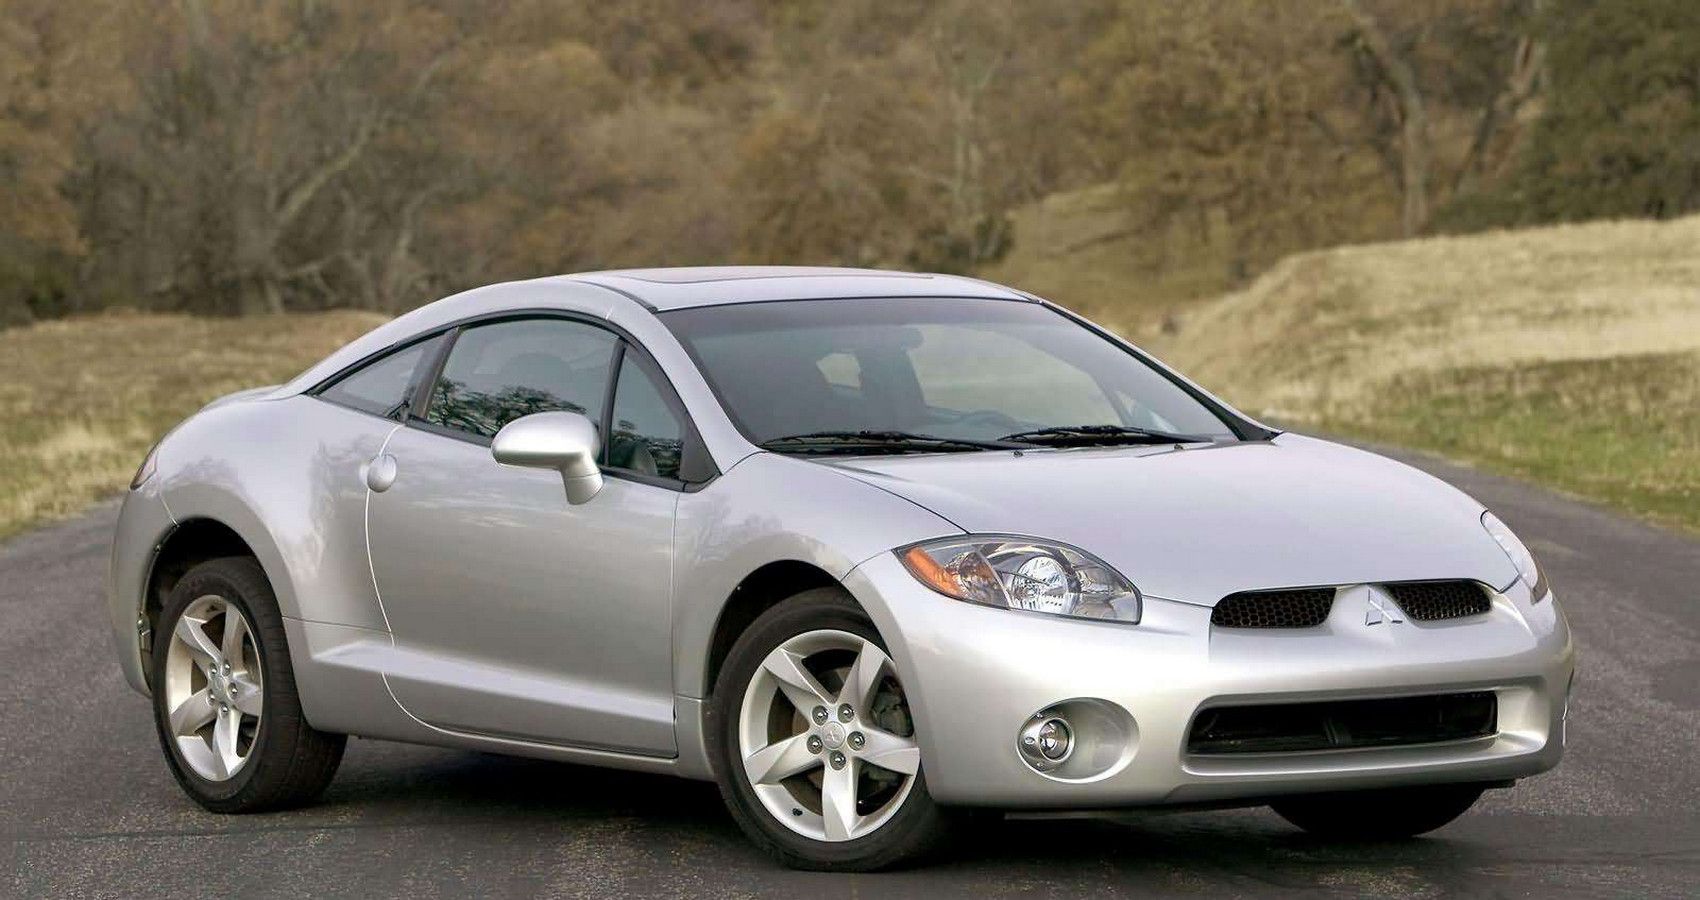 Silver Mitsubishi Eclipse GT on the road